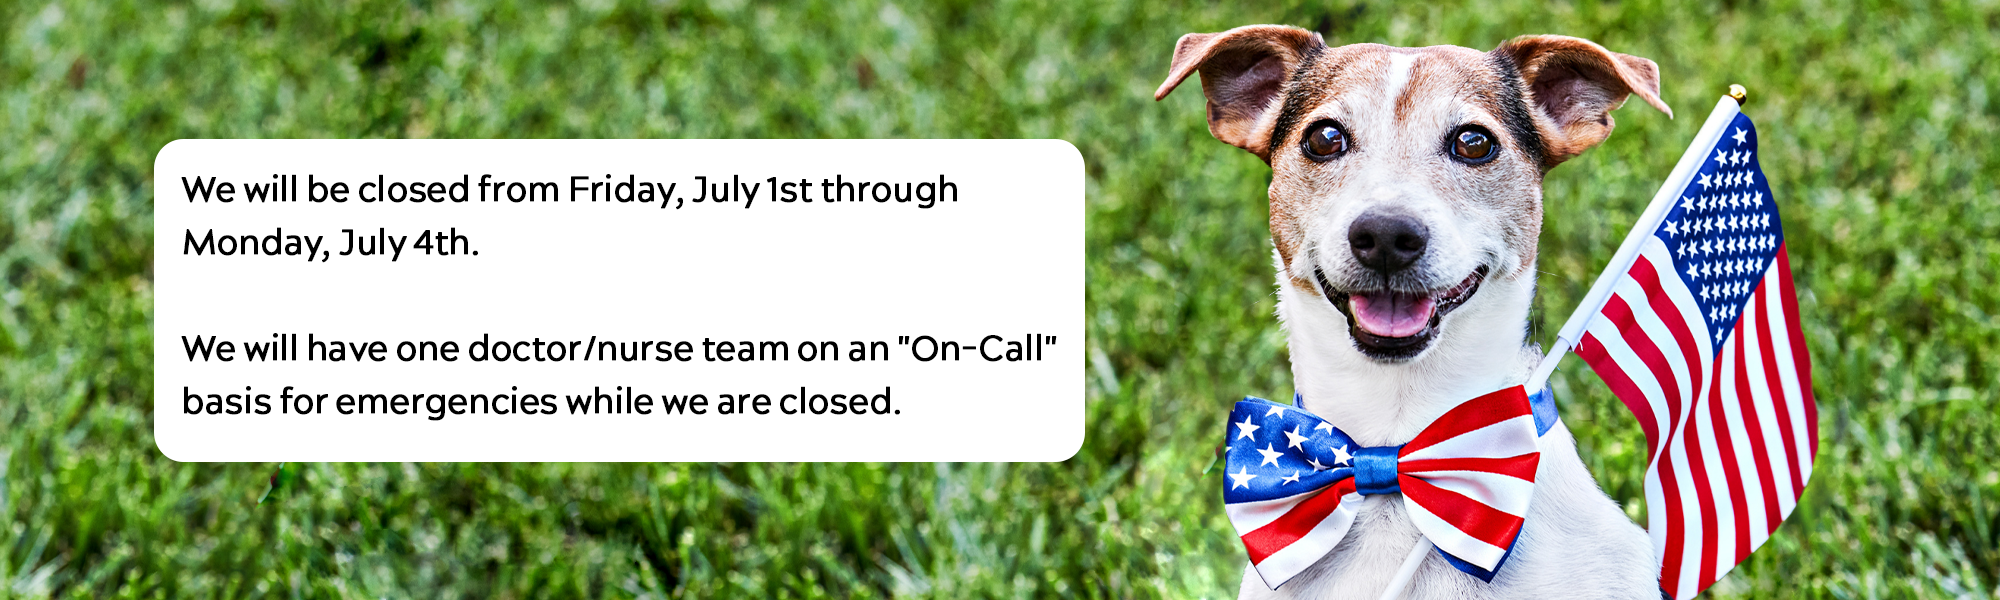 We will be closed from Friday, July 1st through Monday, July 4th.  We will have one doctor/nurse team on an "On-Call" basis for emergencies while we are closed. 